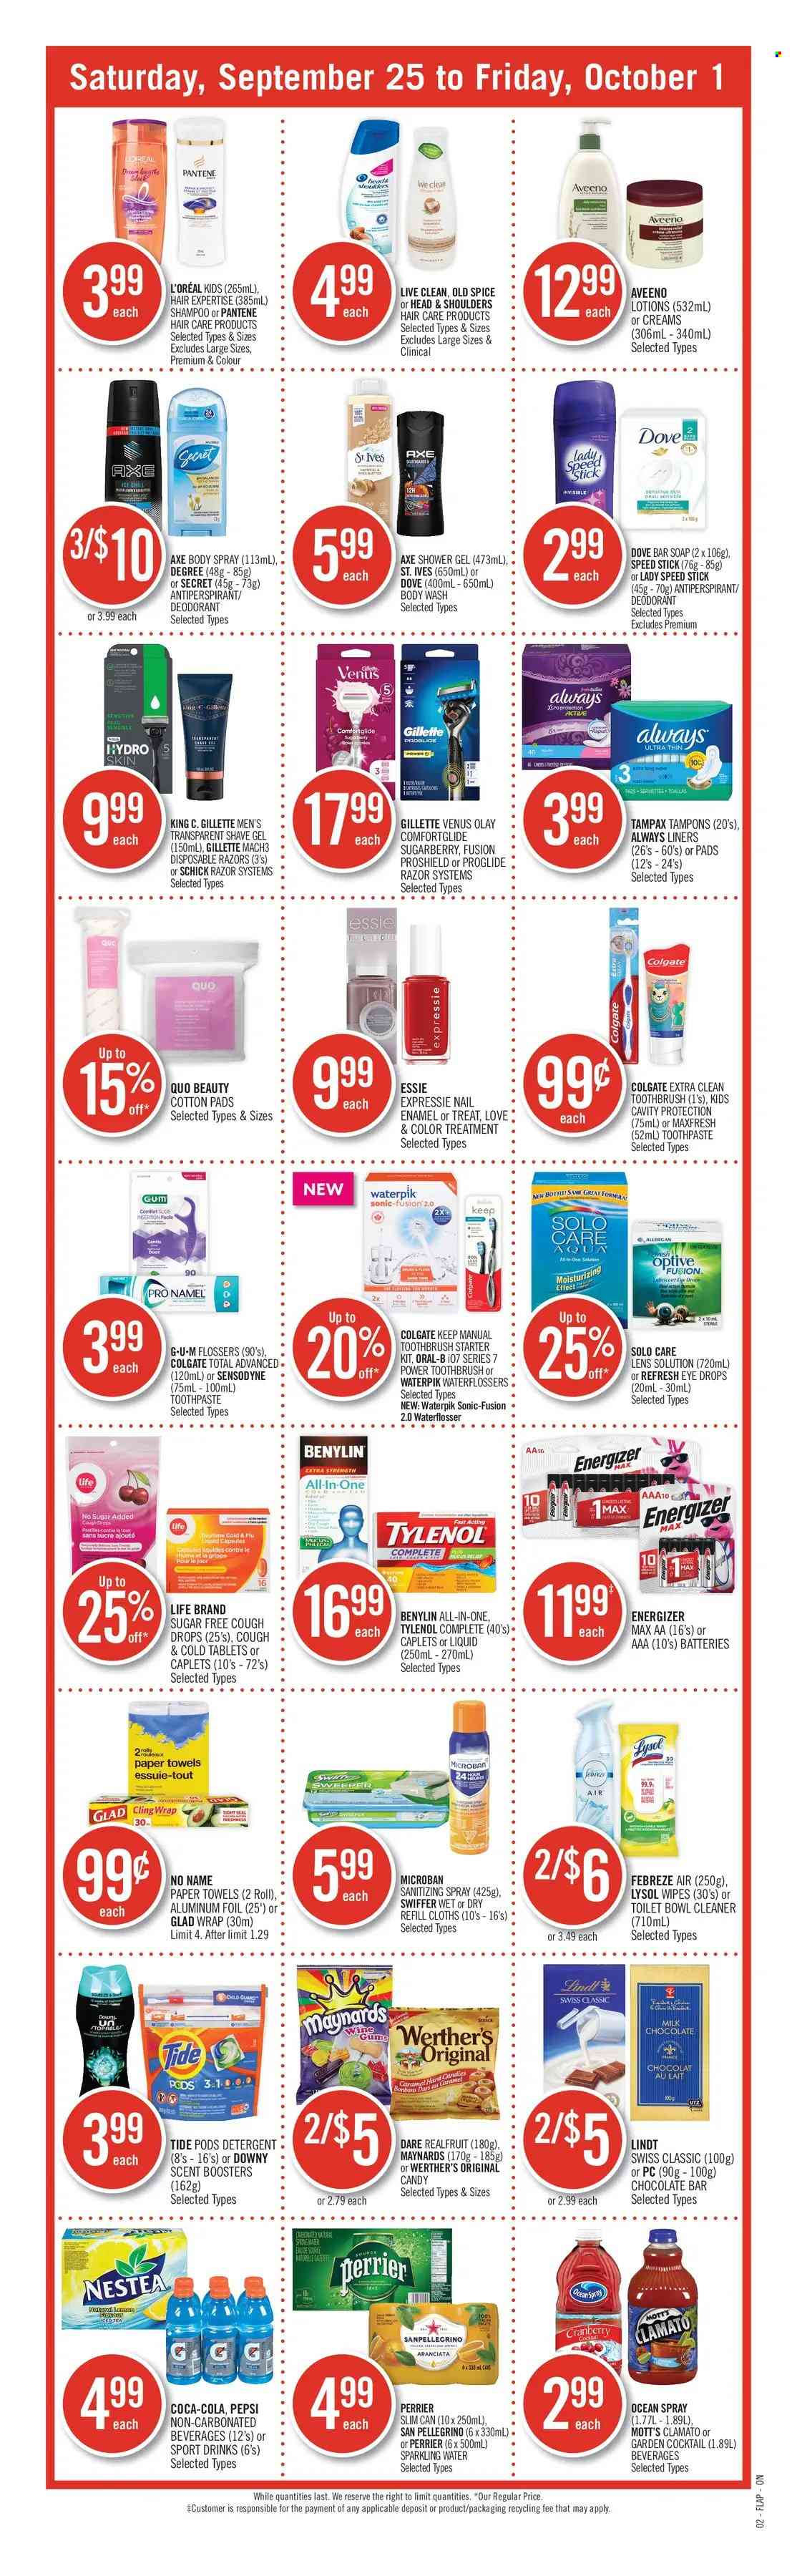 thumbnail - Shoppers Drug Mart Flyer - September 25, 2021 - October 01, 2021 - Sales products - milk chocolate, Mott's, chocolate bar, spice, caramel, Coca-Cola, Pepsi, Clamato, Perrier, sparkling water, San Pellegrino, wipes, Aveeno, Always liners, kitchen towels, paper towels, Febreze, cleaner, Lysol, Swiffer, Tide, scent booster, body wash, shower gel, soap bar, soap, toothbrush, toothpaste, tampons, L’Oréal, Olay, body spray, anti-perspirant, Speed Stick, razor, shave gel, Schick, Venus, disposable razor, nail enamel, Cold & Flu, Tylenol, eye drops, cough drops, Benylin, detergent, Dove, Energizer, Colgate, Gillette, shampoo, Tampax, Head & Shoulders, Pantene, Old Spice, Oral-B, Sensodyne, Lindt, deodorant. Page 17.